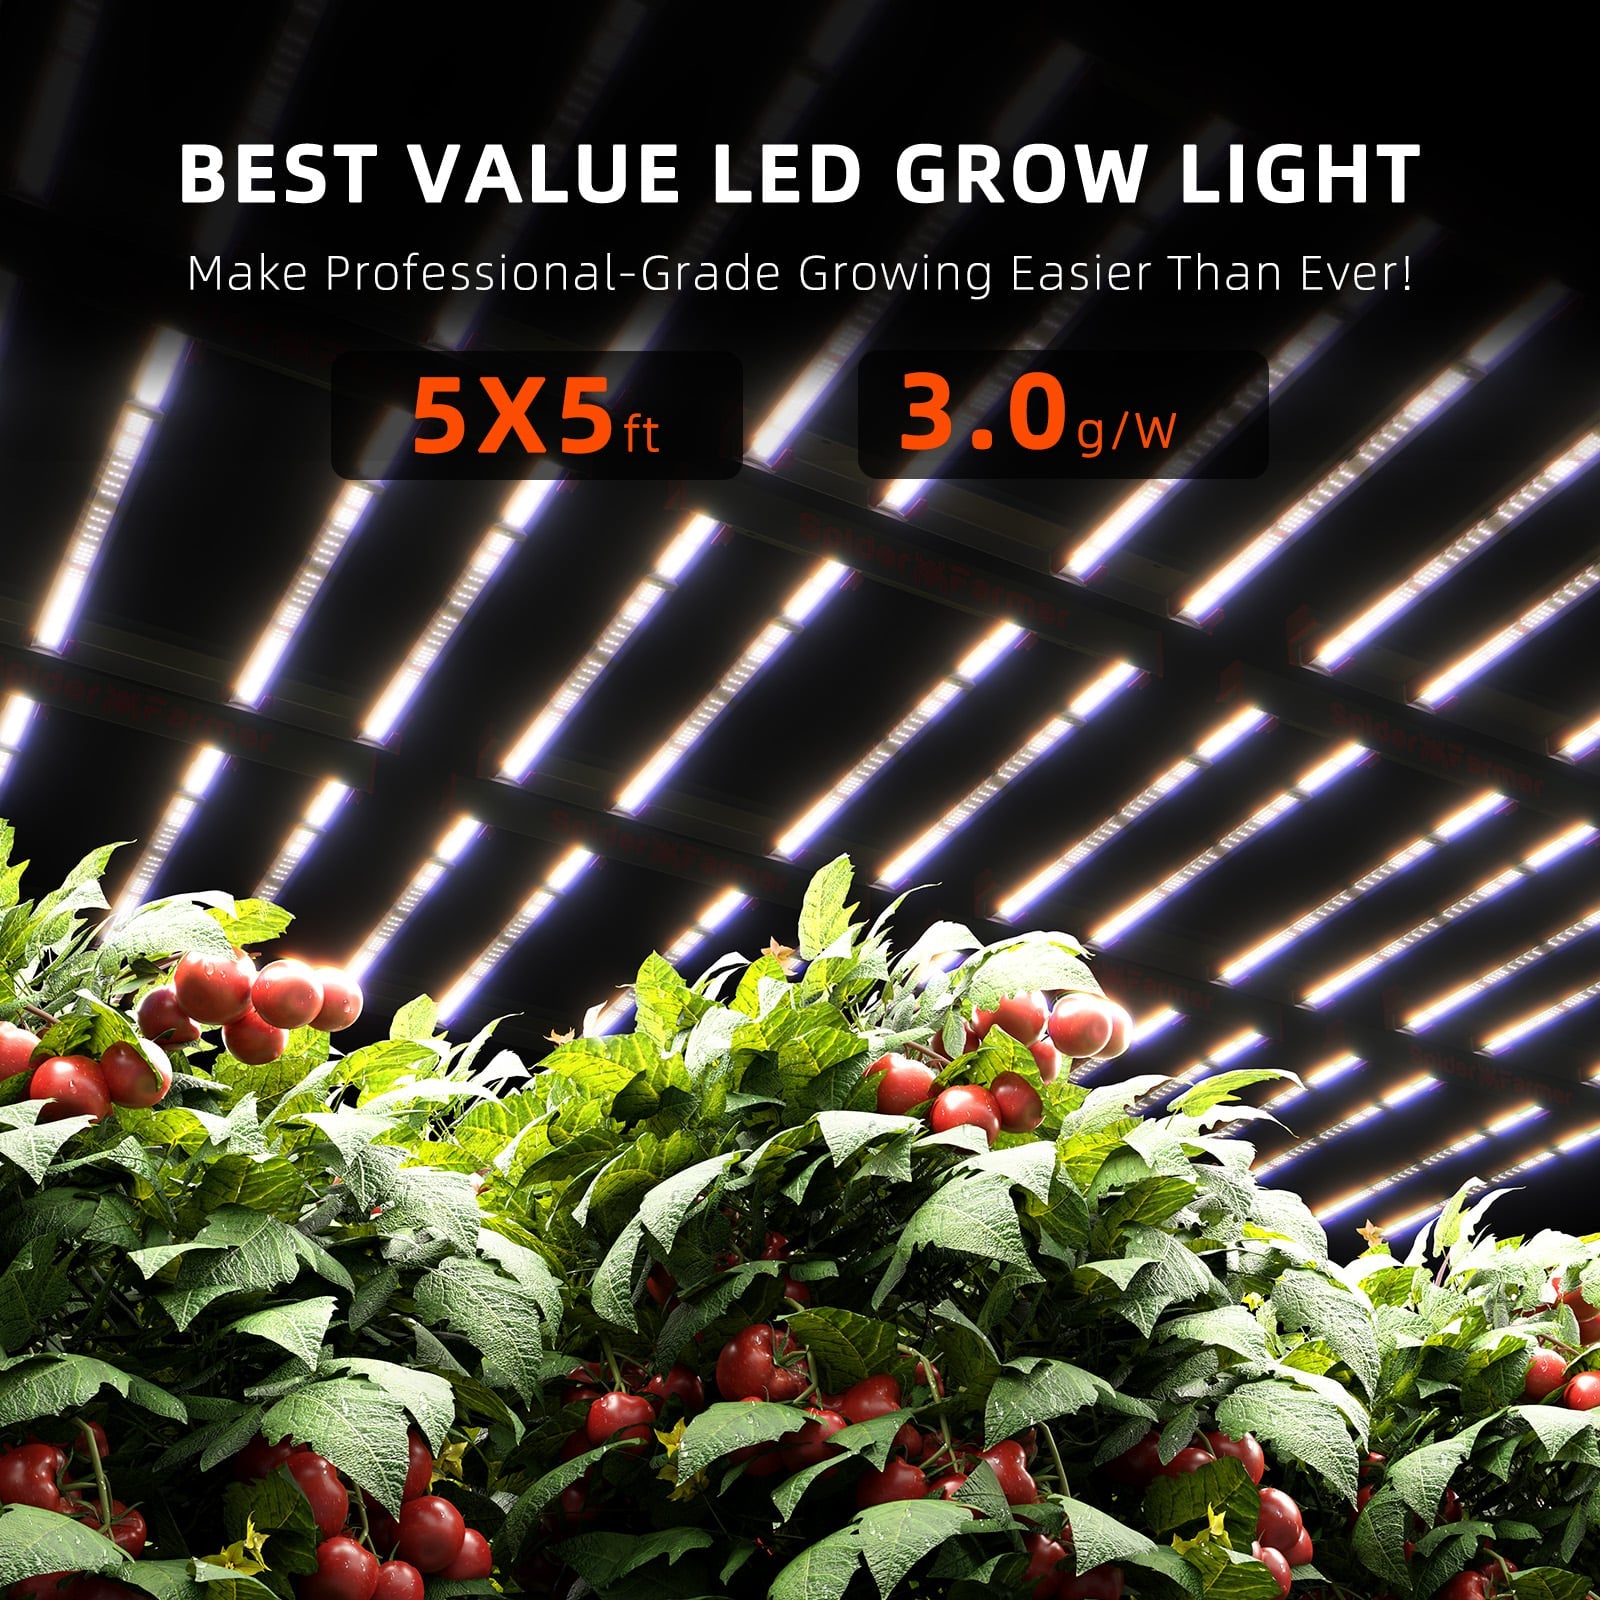 Product Secondary Image:Spider Farmer® G8600 Dimmable Cost-effective Full Spectrum CO2 Commercial LED Grow Light